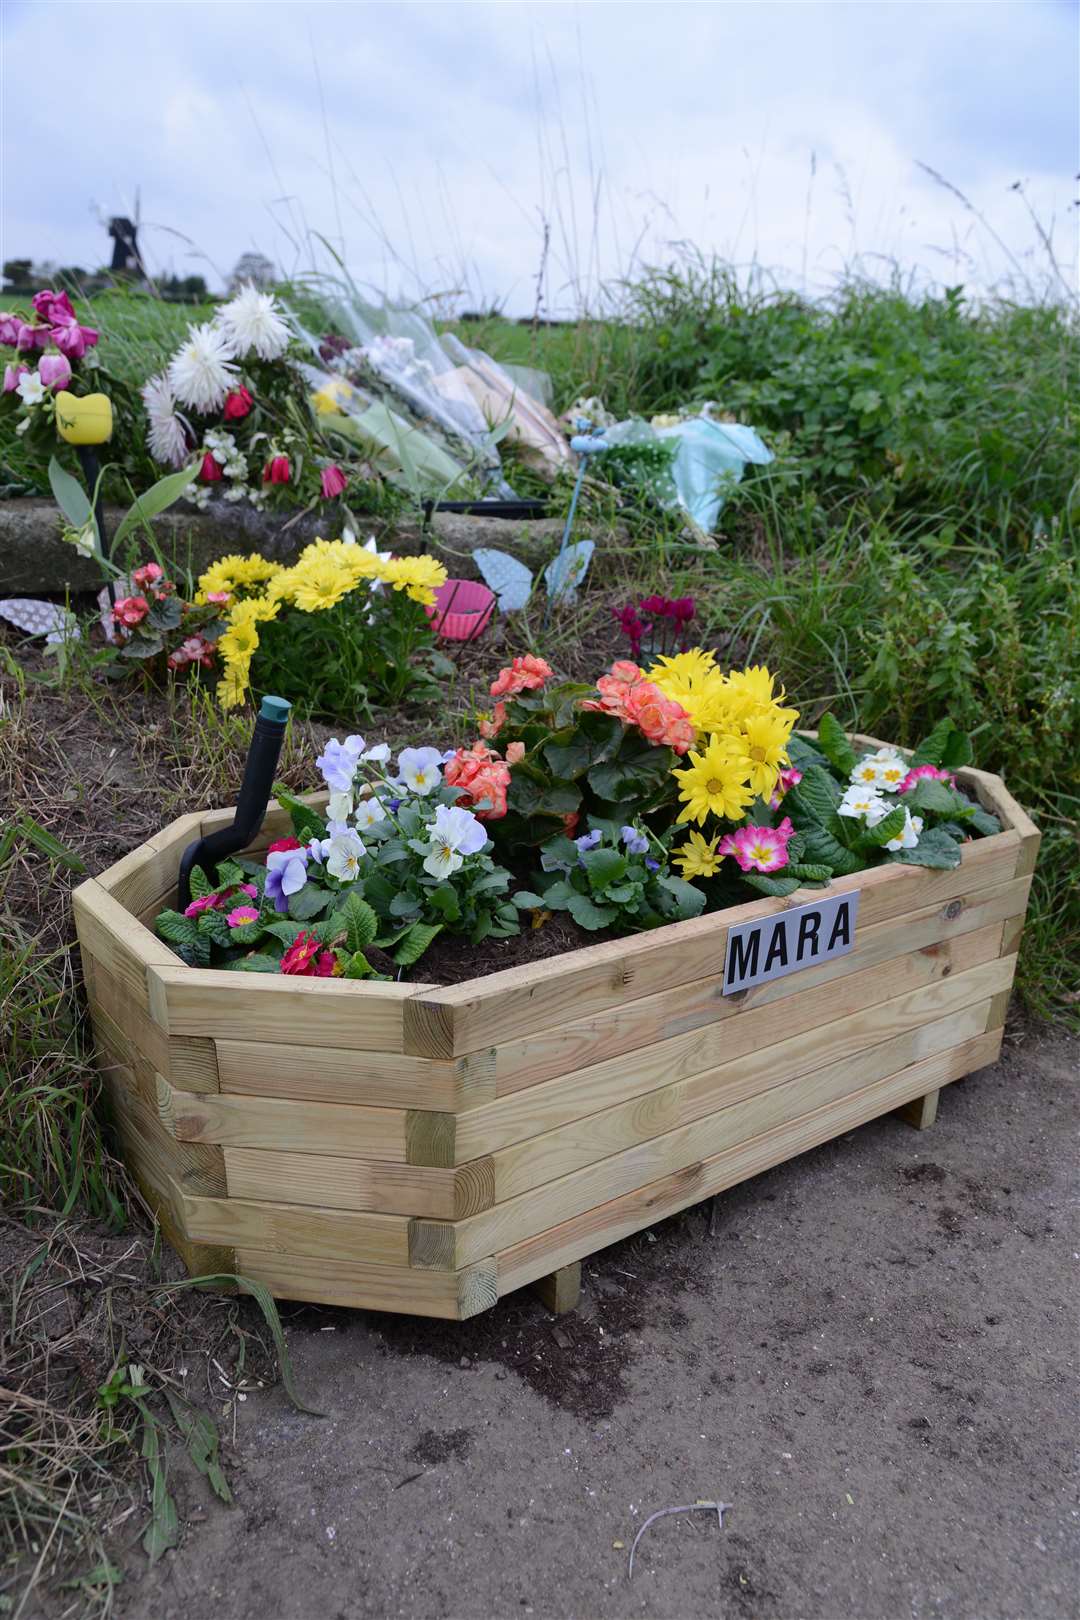 Floral tributes left for Mara Nunes at the scene of the accident